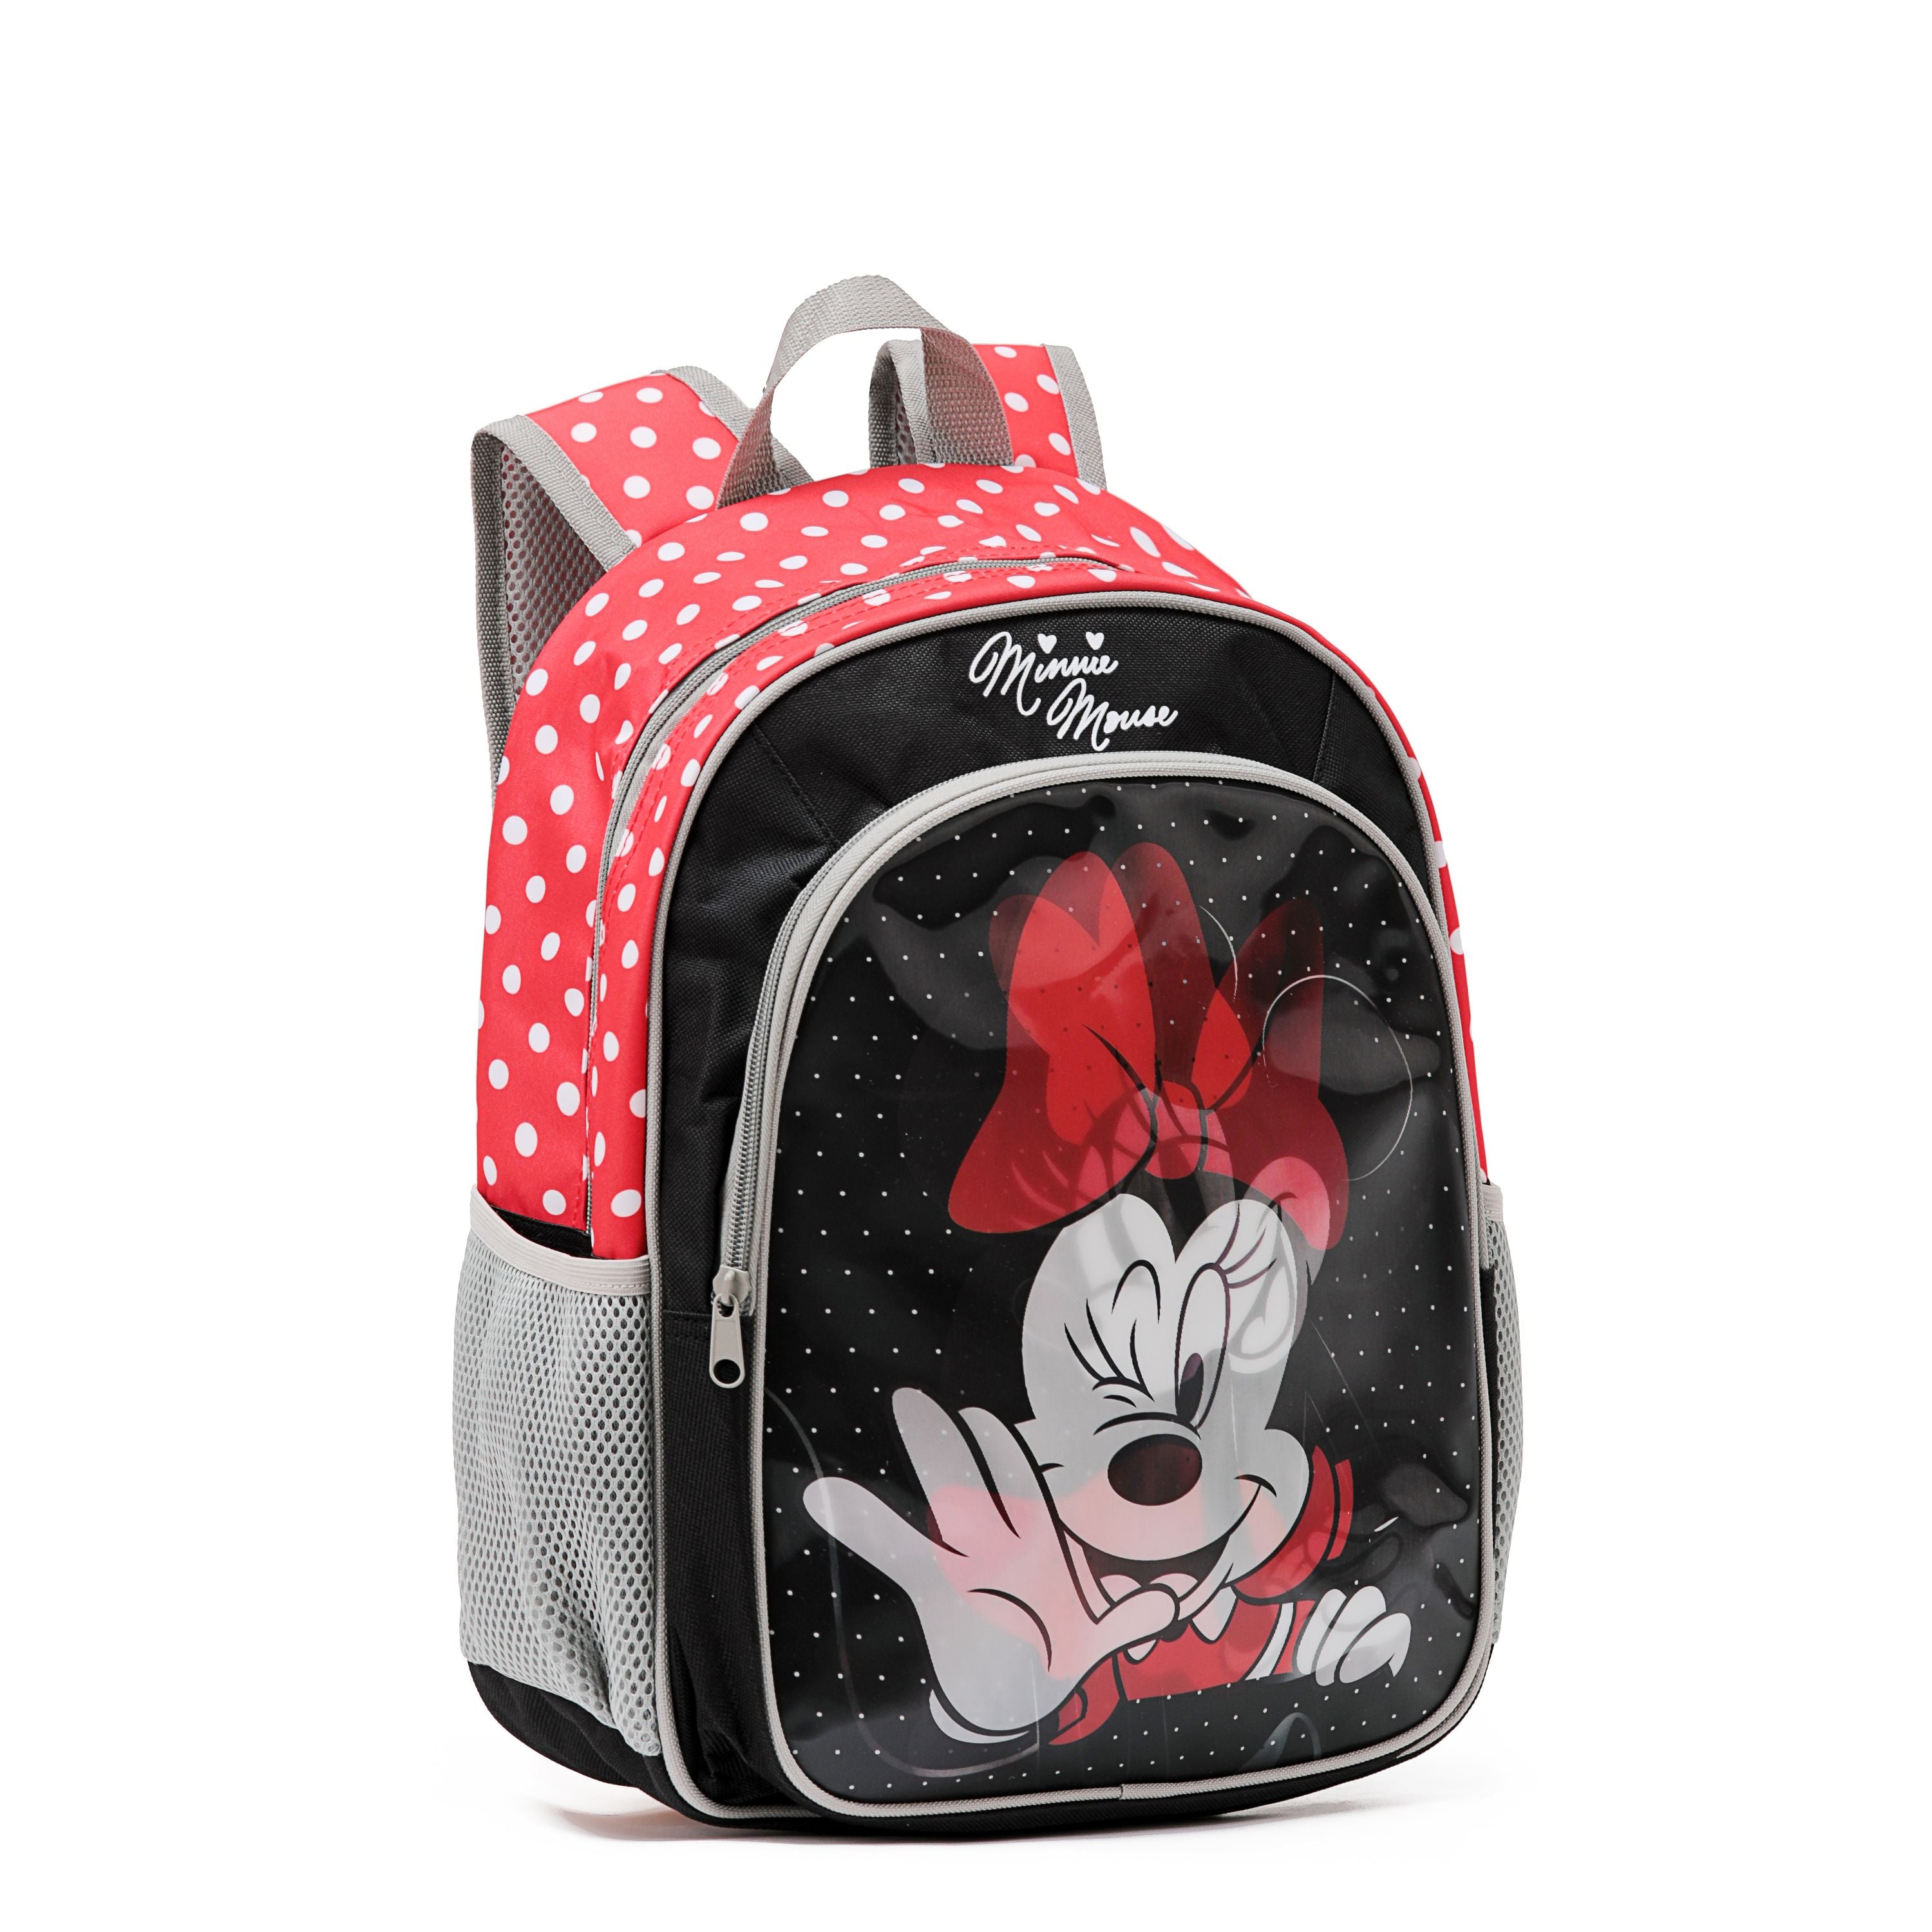 Disney - Minnie Mouse Dis215 15in Hologram backpack - Black/Red-1